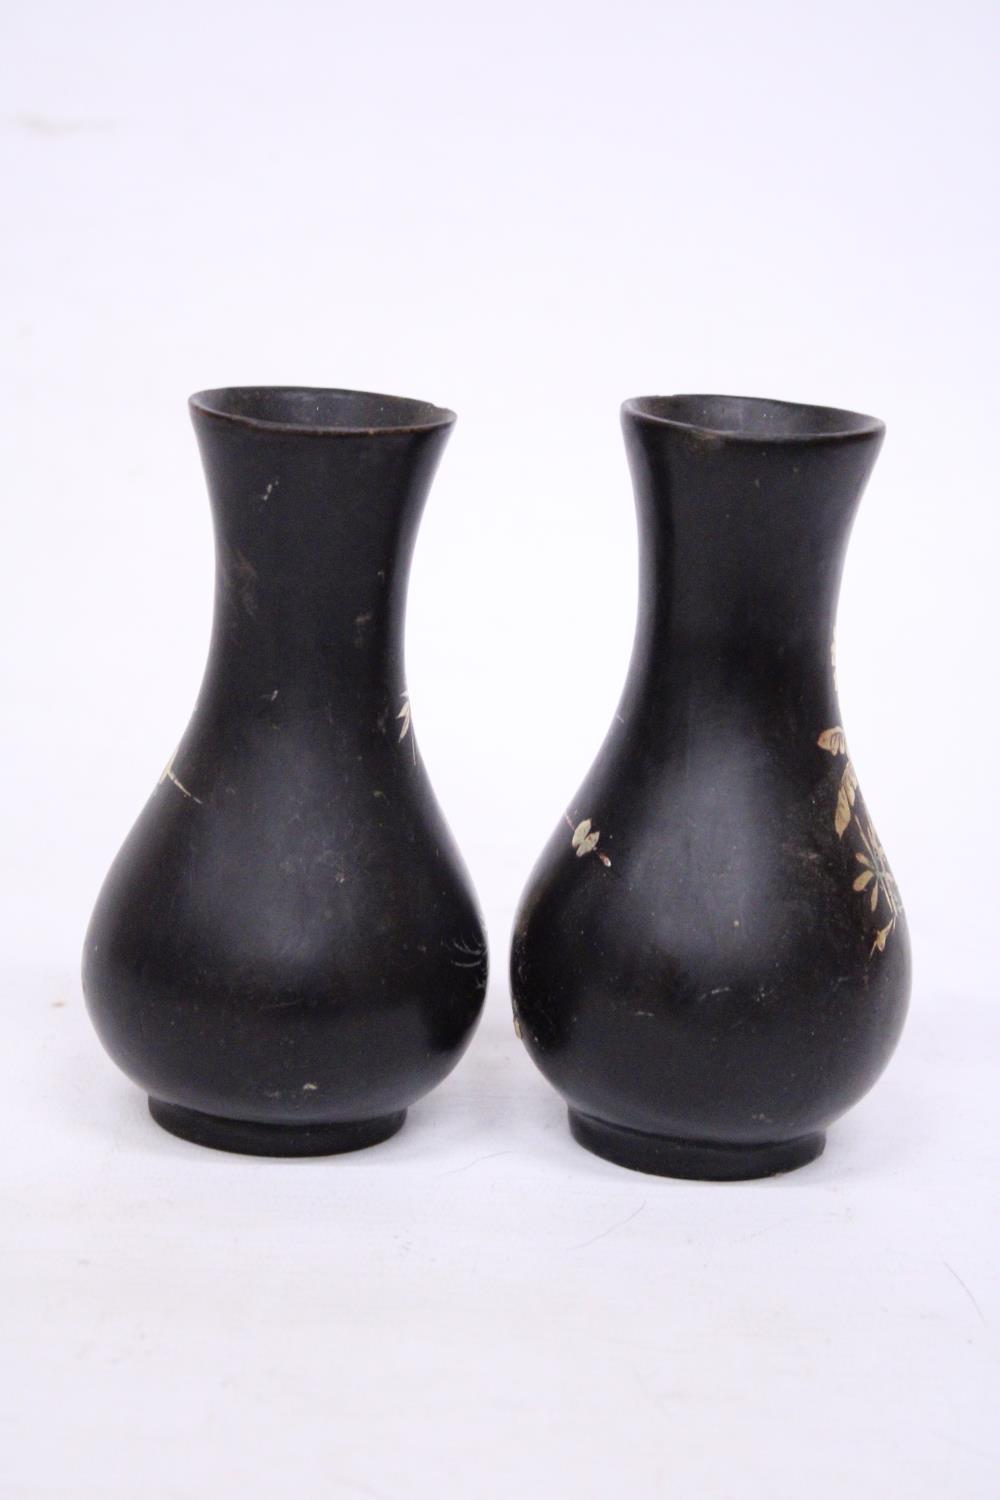 A PAIR OF FOOTED WOODEN LACQUER VASES WITH ORIENTAL SCENES - 14 CM (H) - Image 3 of 5